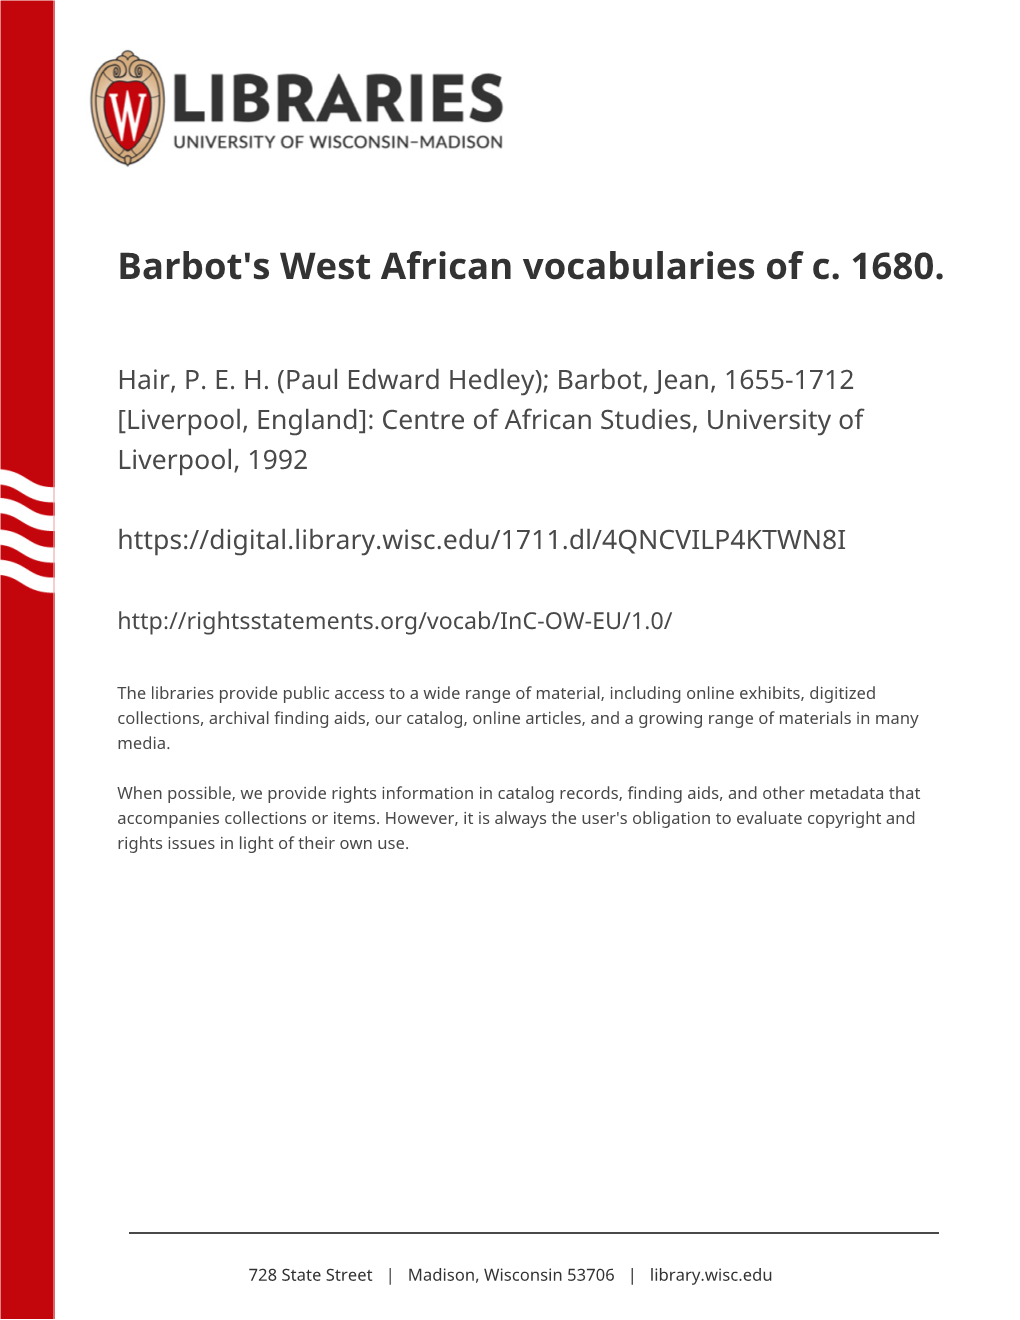 Barbot's West African Vocabularies of C. 1680